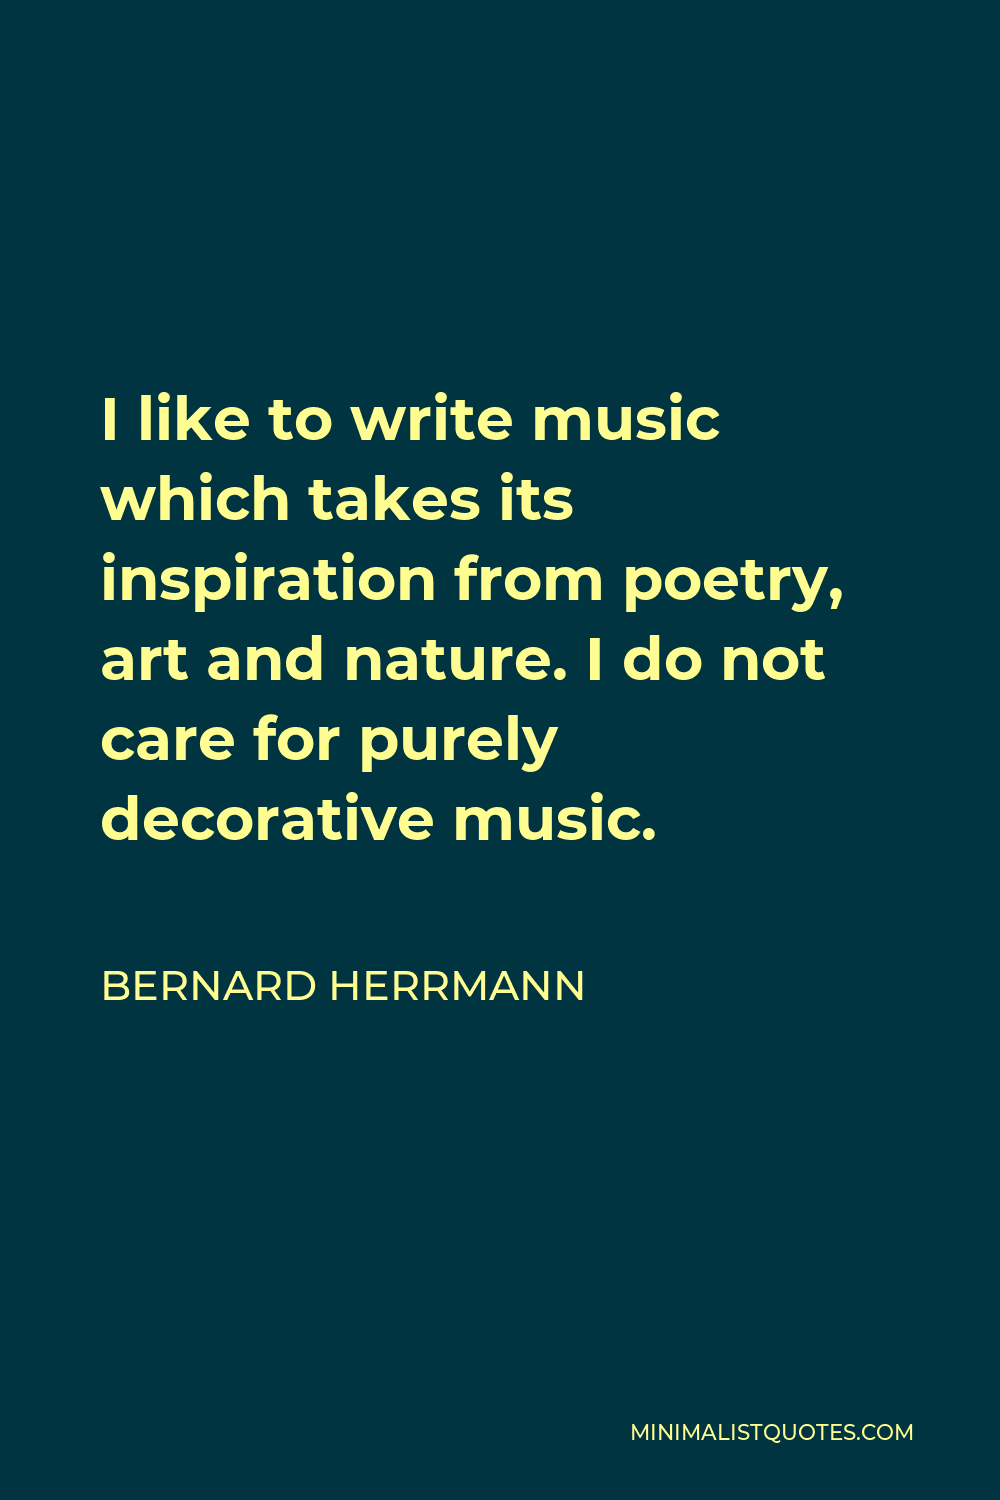 Bernard Herrmann Quote - I like to write music which takes its inspiration from poetry, art and nature. I do not care for purely decorative music.